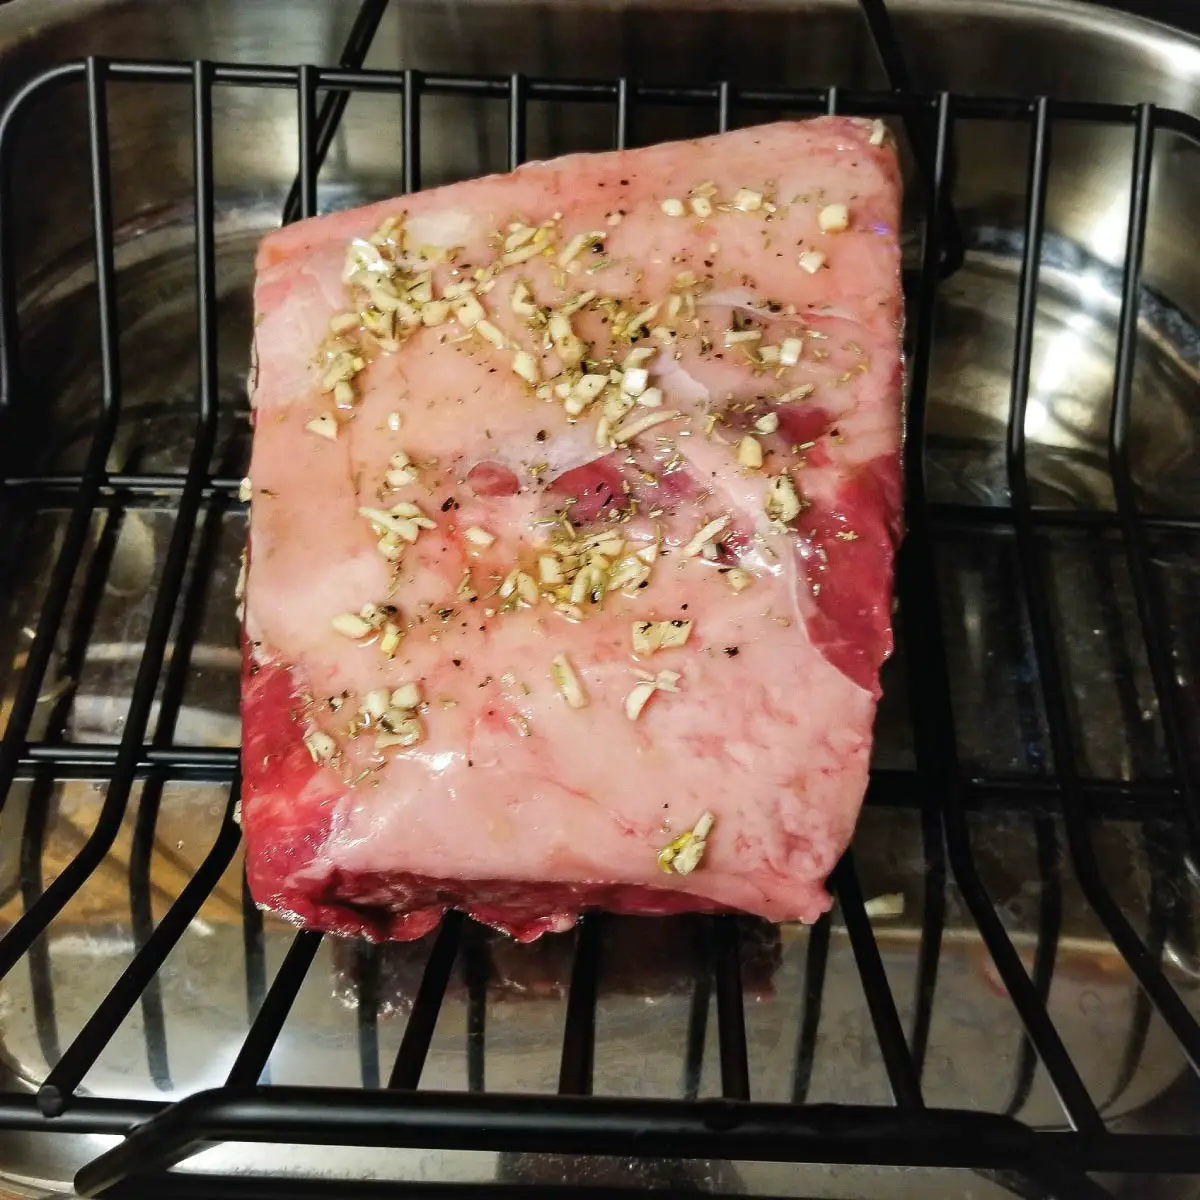 Roast on a rack in the roasting pan covered in the seasoning mix ready to go in the oven.